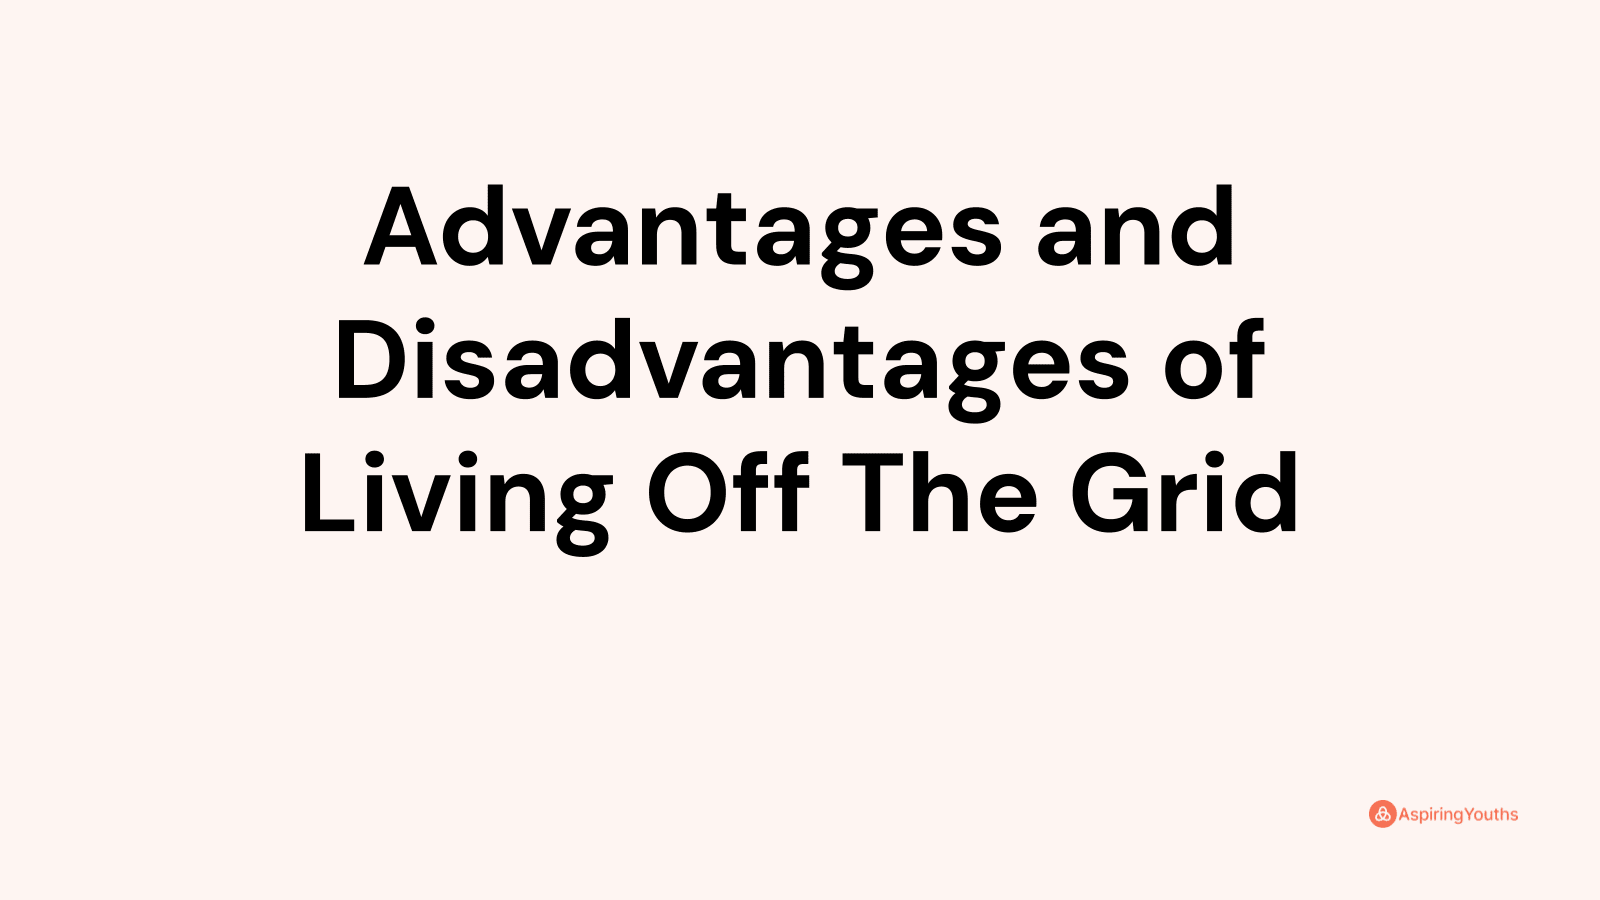 Advantages and disadvantages of Living Off The Grid